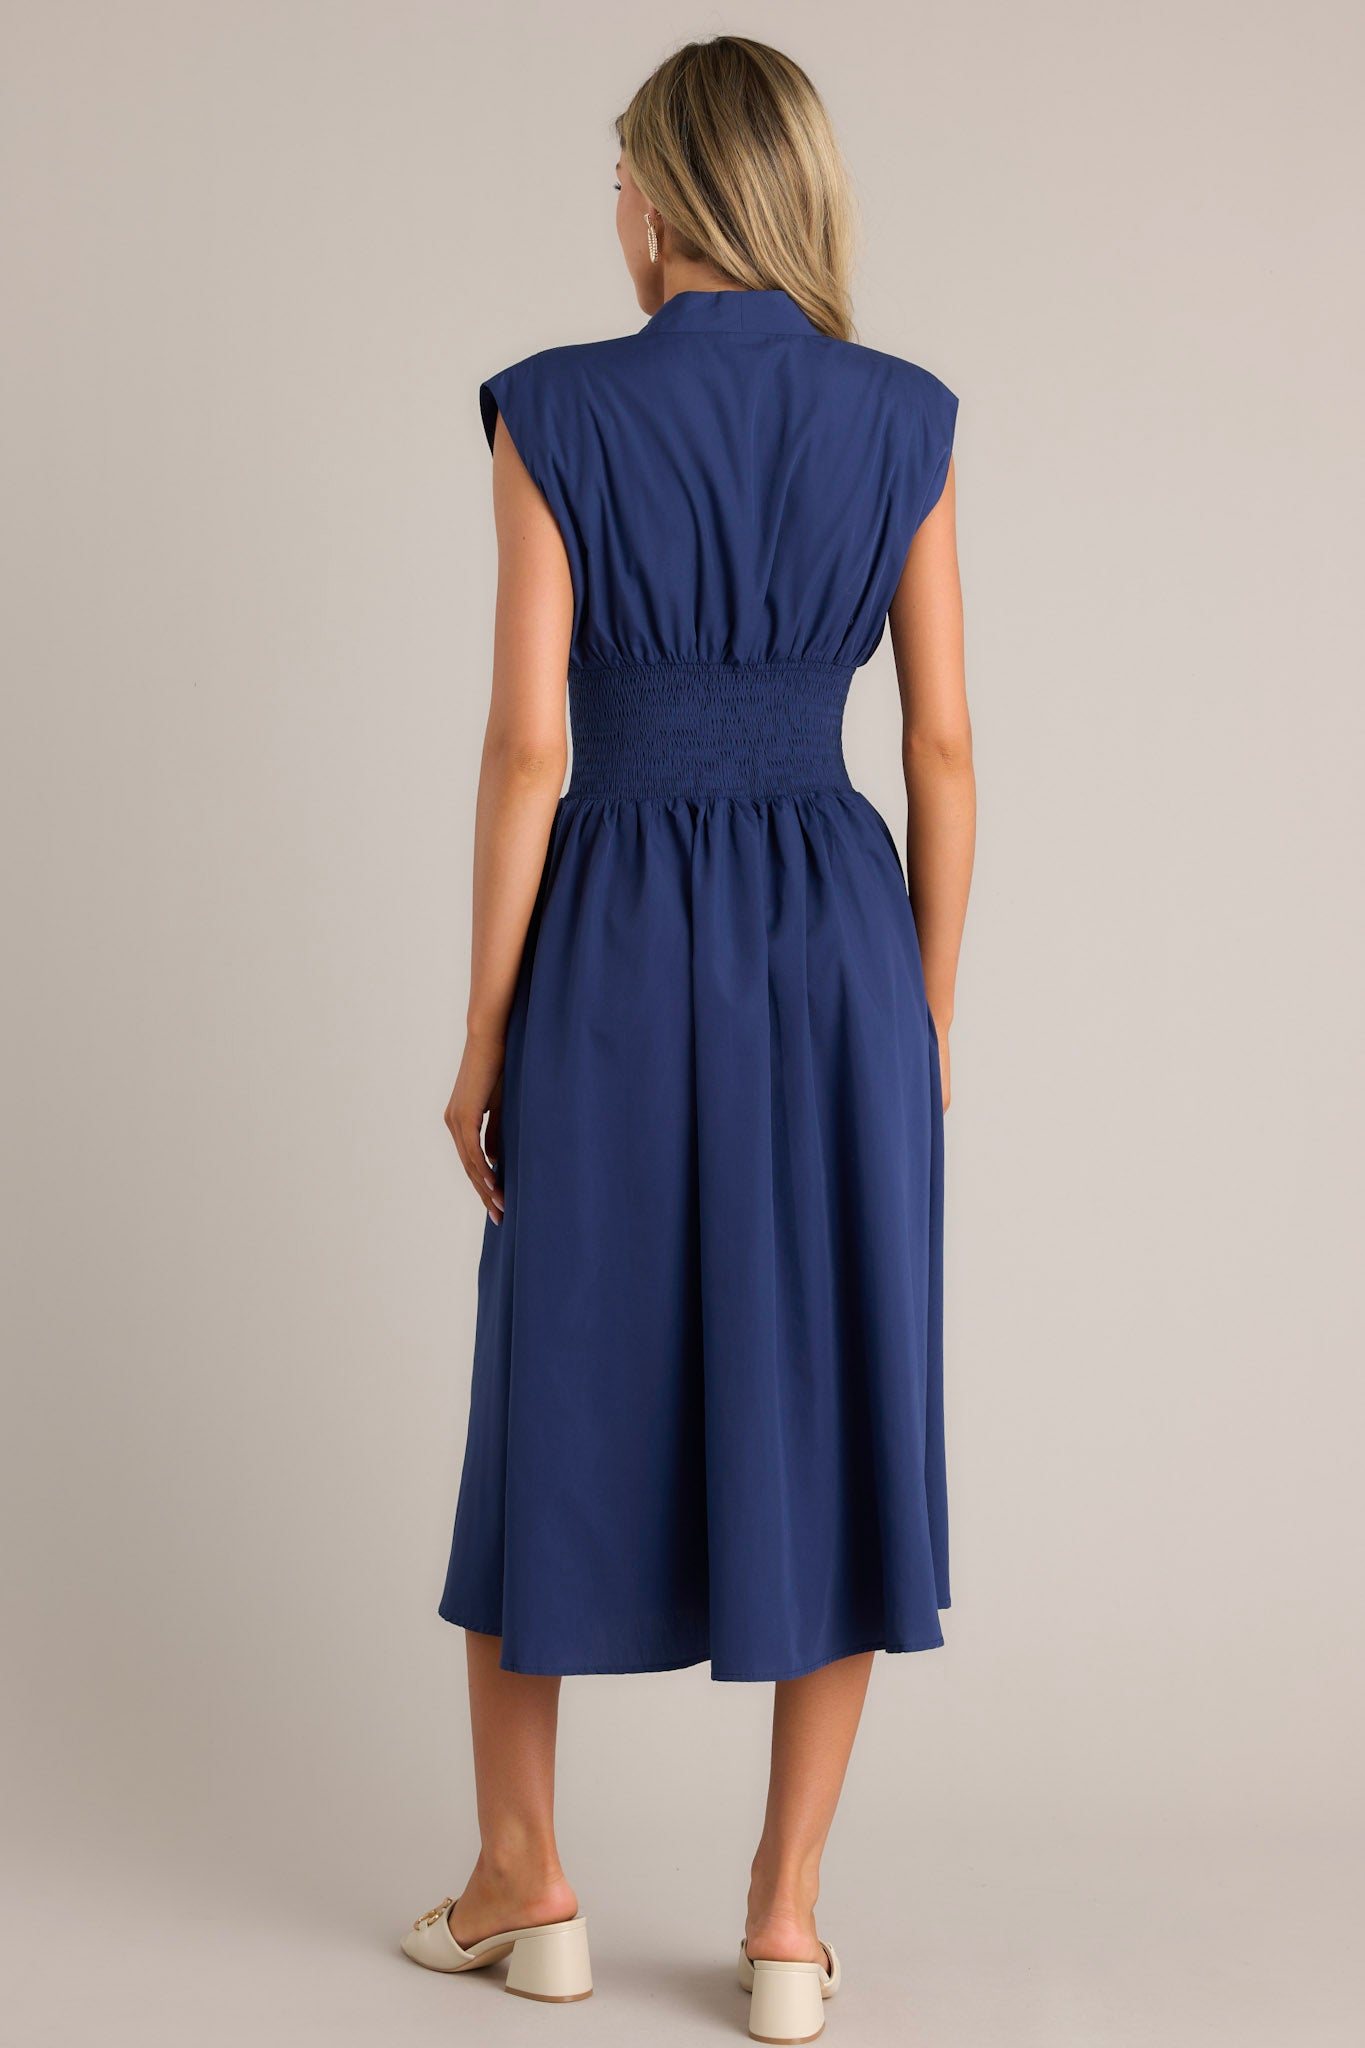 Back view of a navy blue dress with a V-neckline, cap sleeves, a zippered front, and a cinched waist with shirred detailing, featuring a flowing midi-length skirt, highlighting its elegant and stylish design.